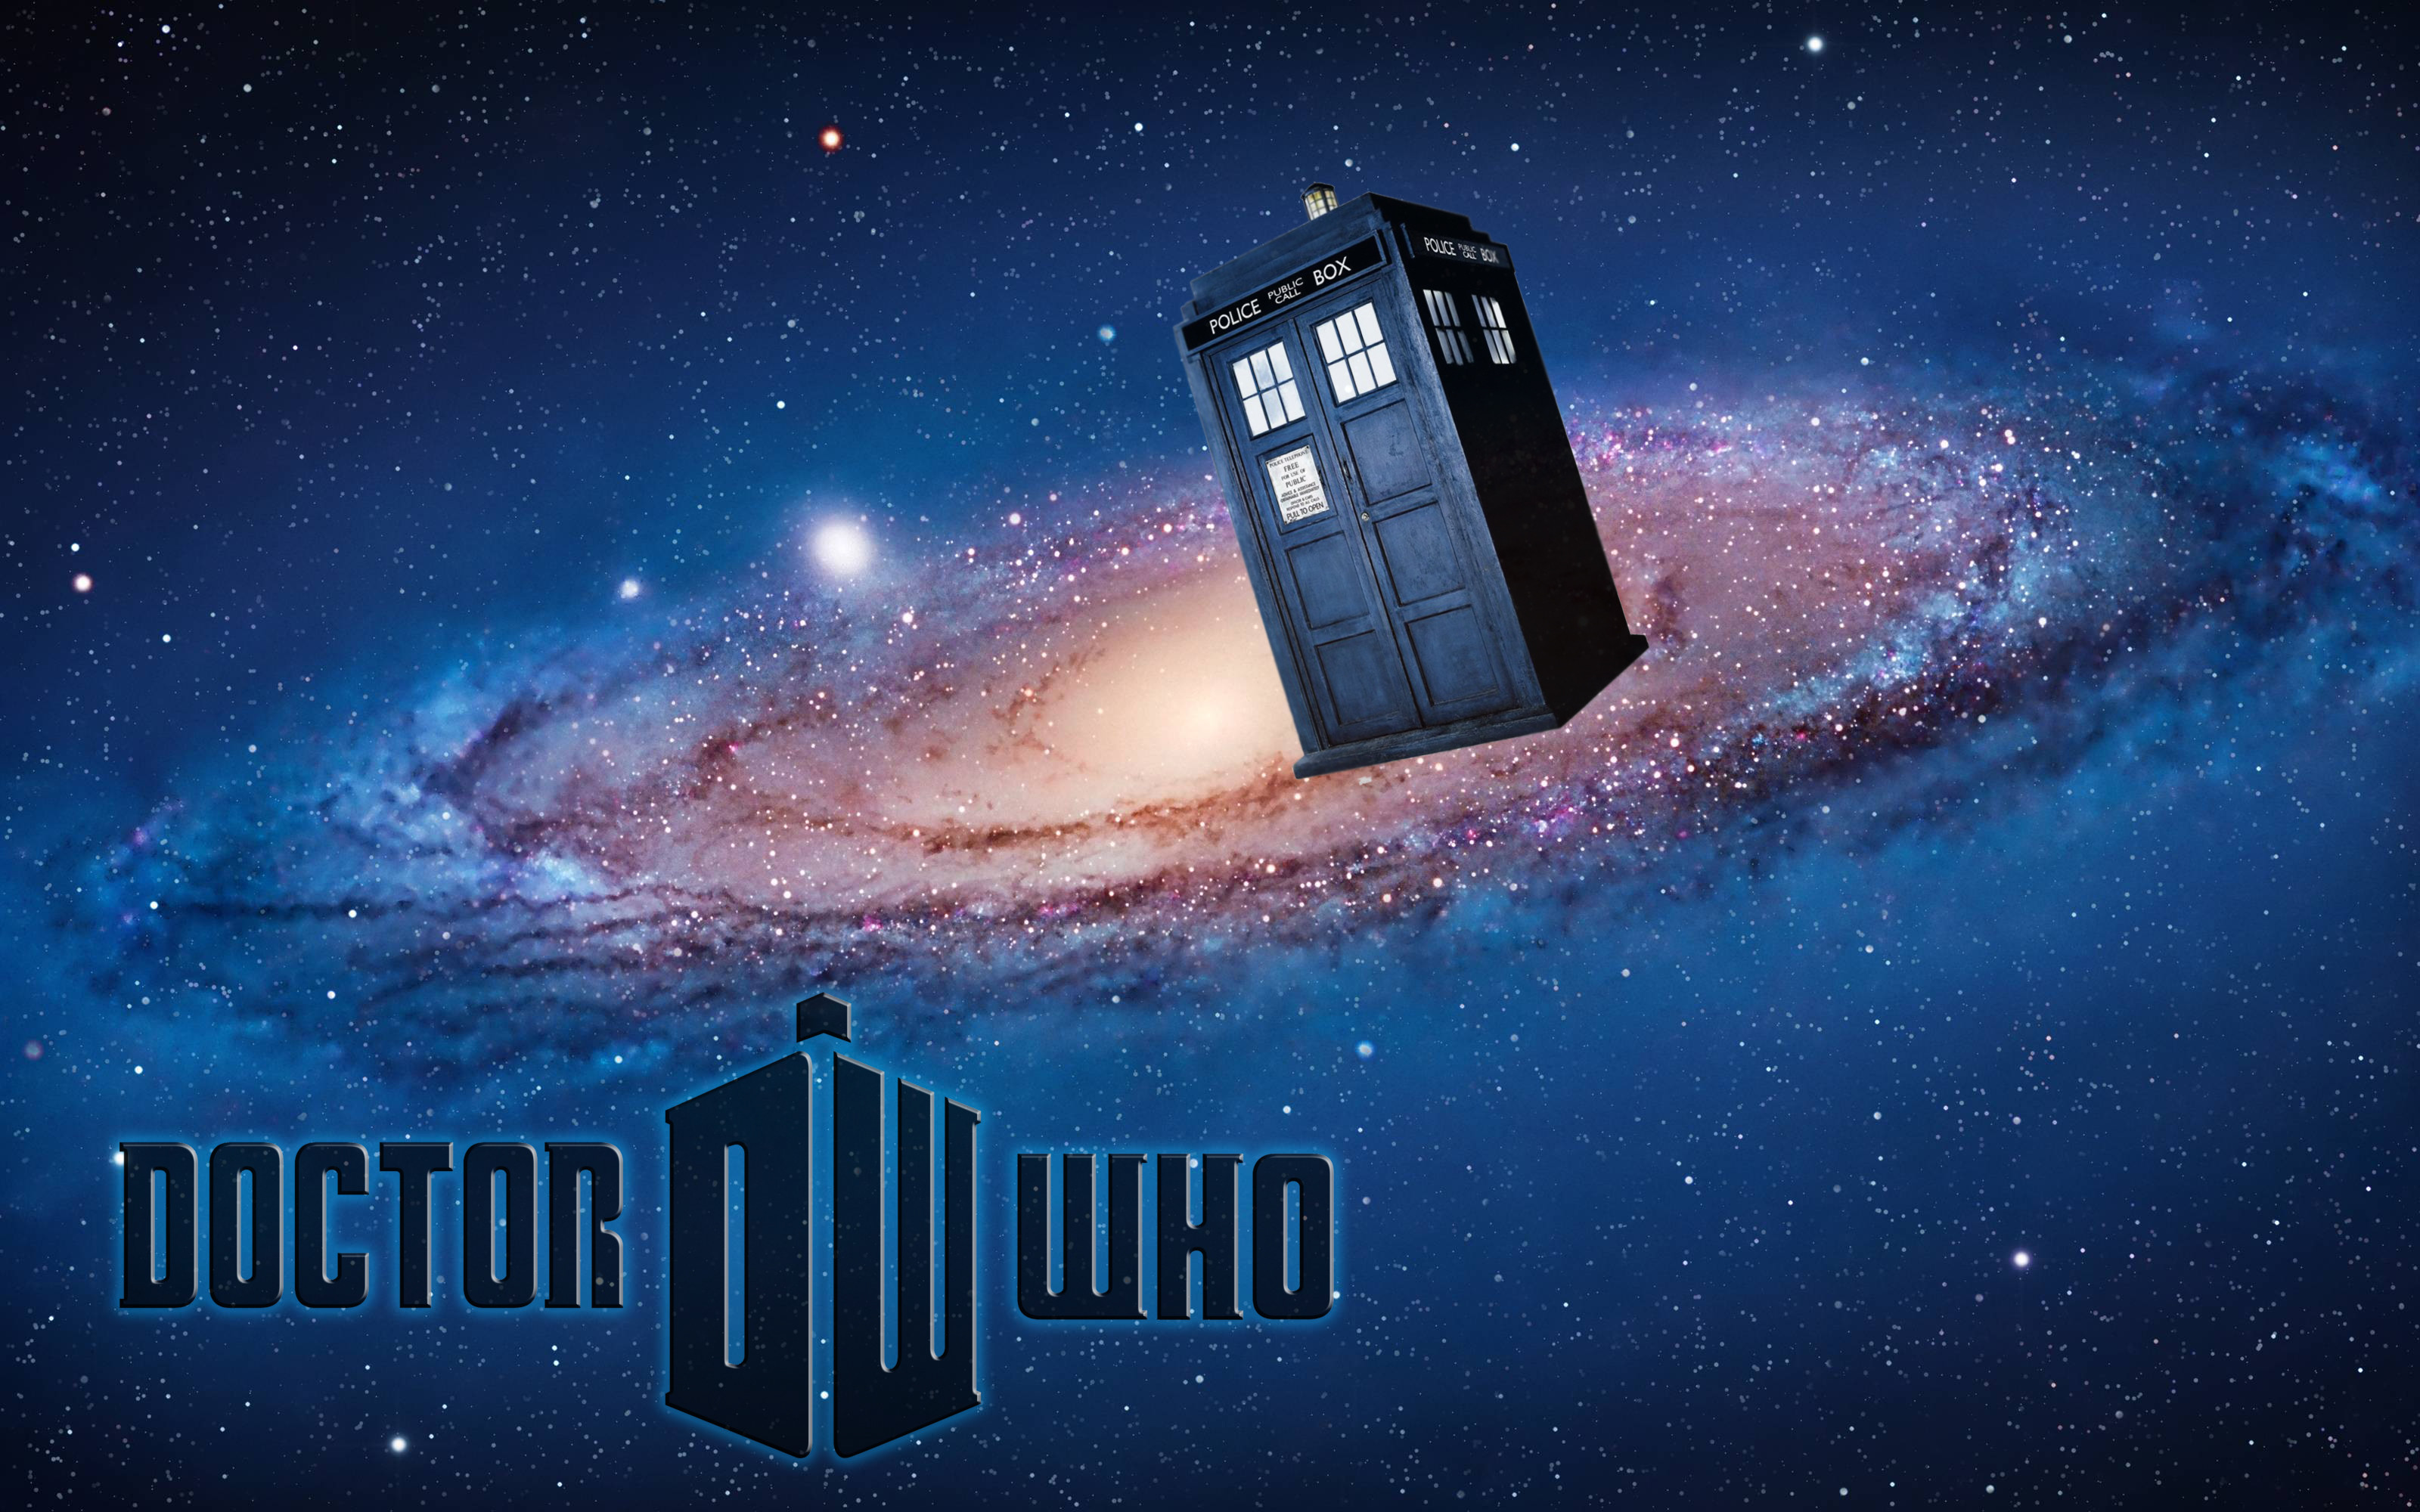 3200x2000 Doctor Who TARDIS Wallpaper (Mac) by iPhoneWallpapers on DeviantArt